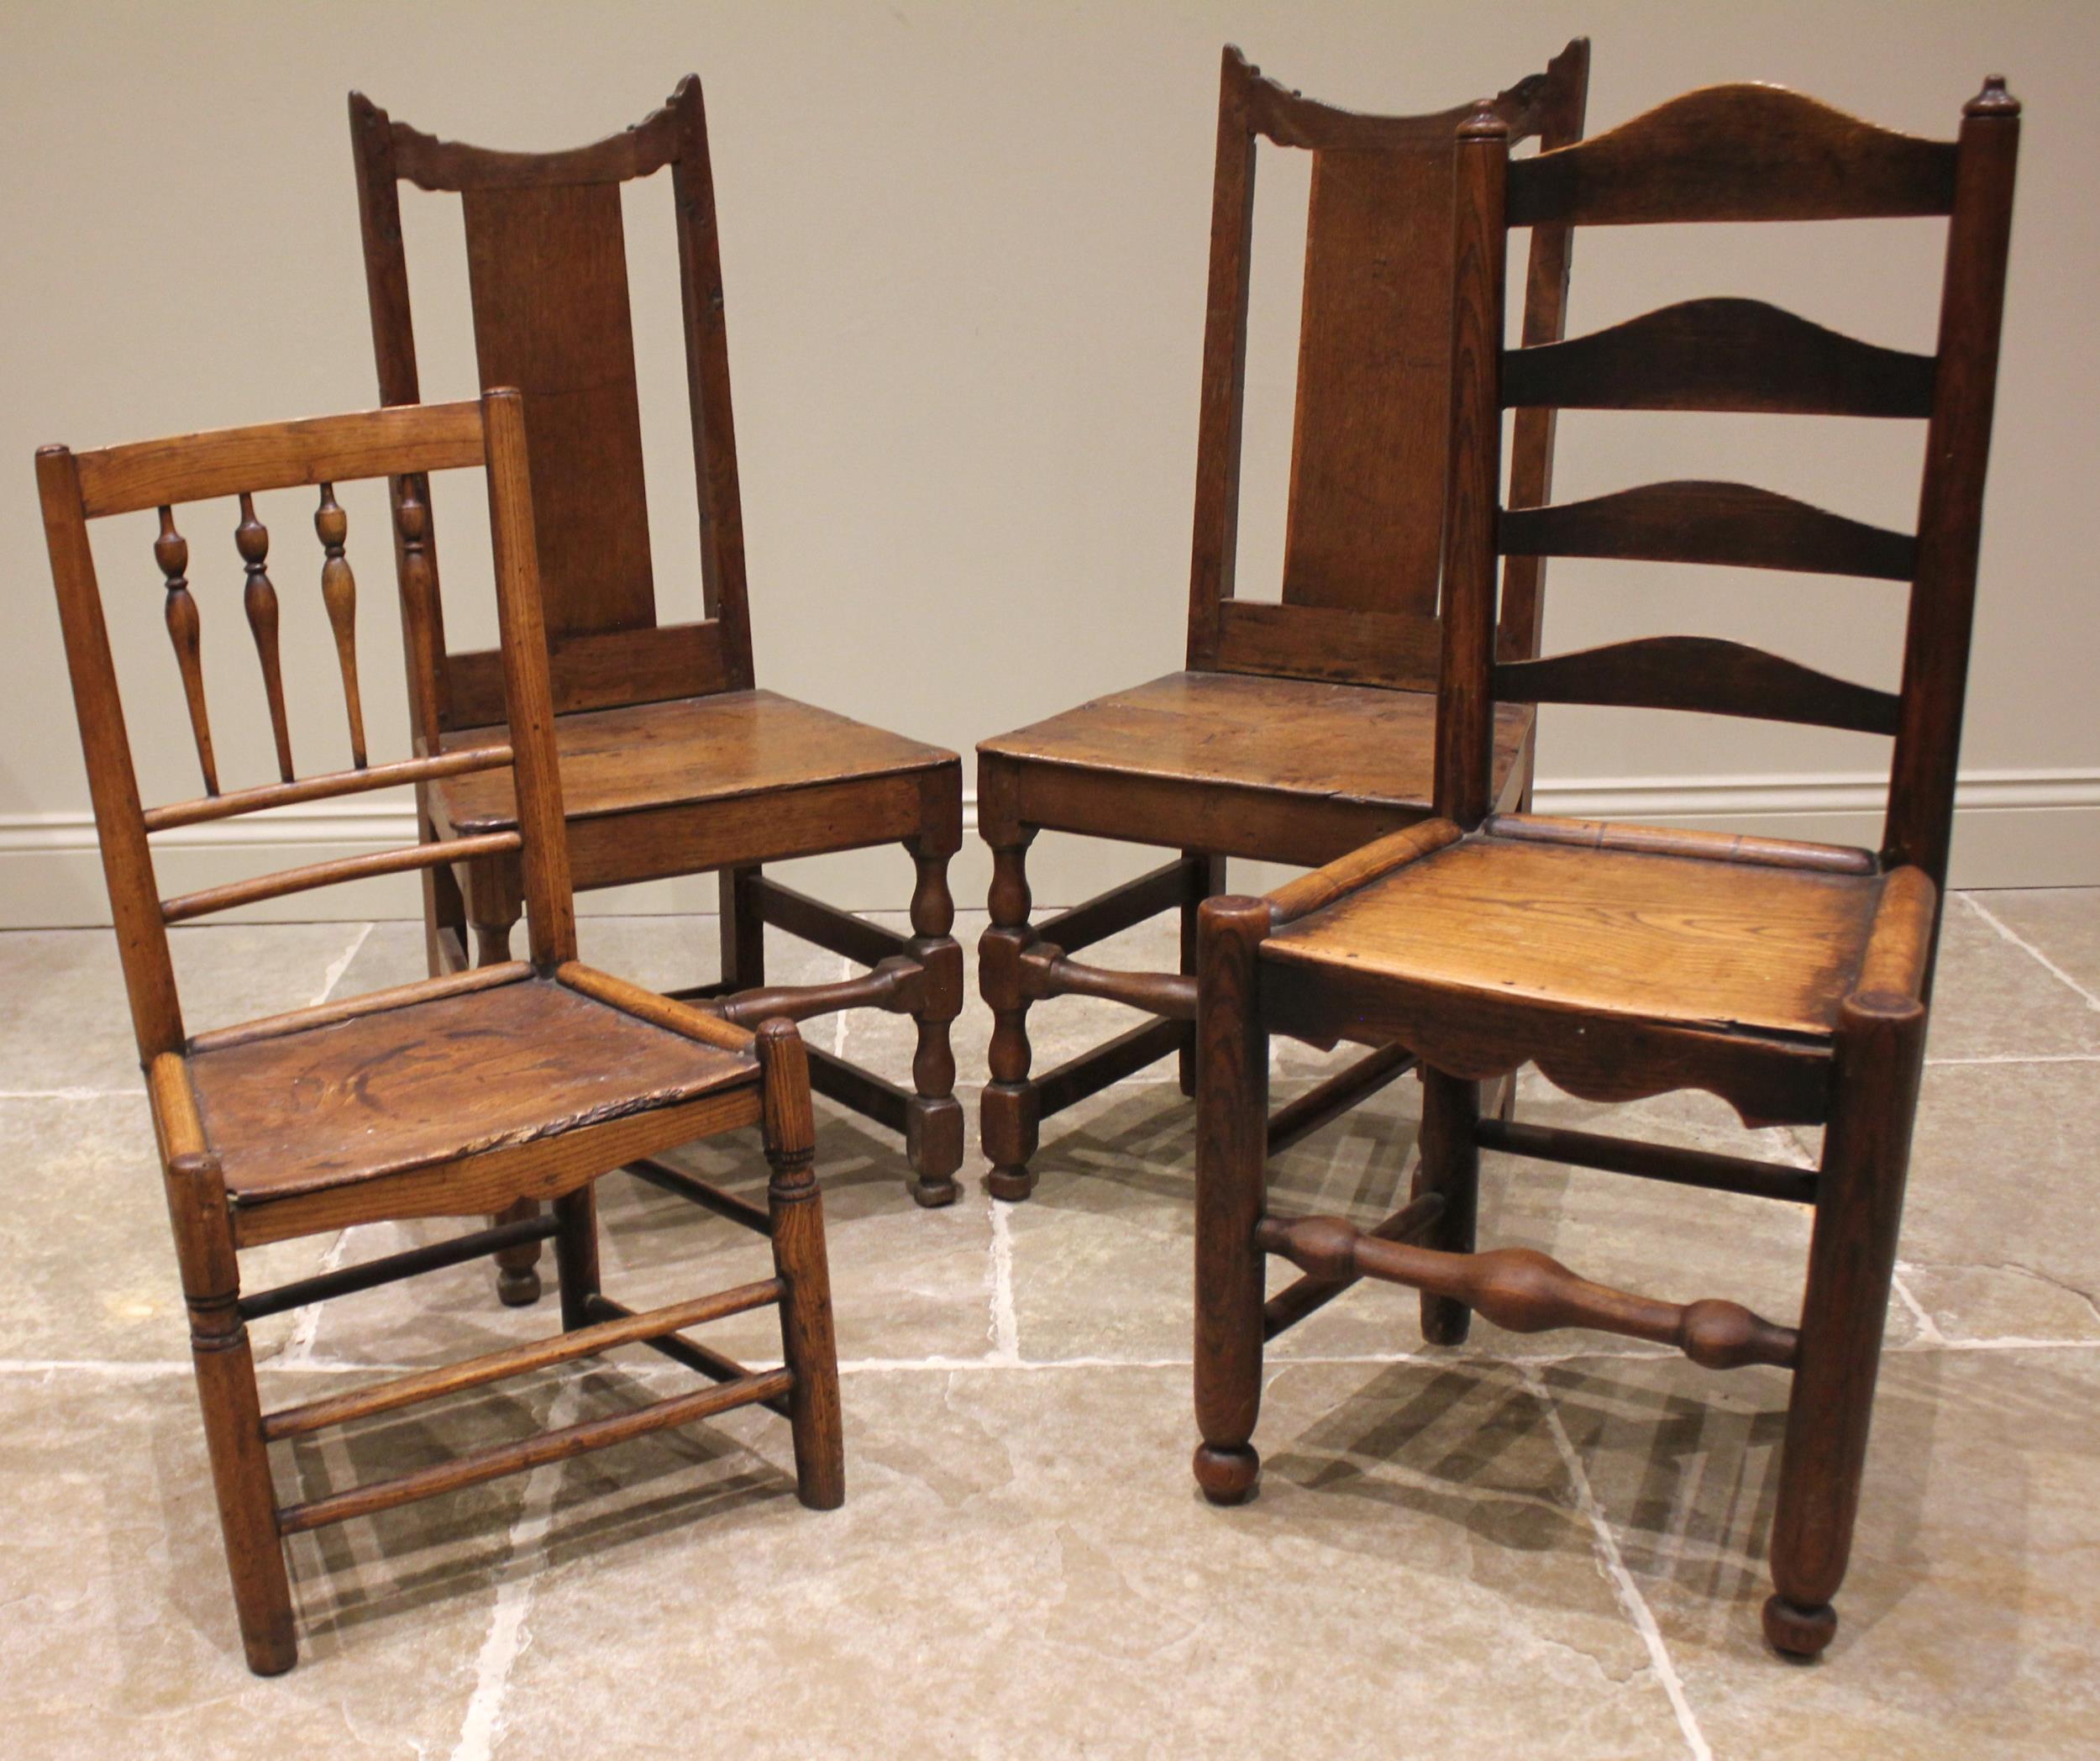 A pair of 18th century oak hall chairs, each with a splat back over a board seat upon baluster and